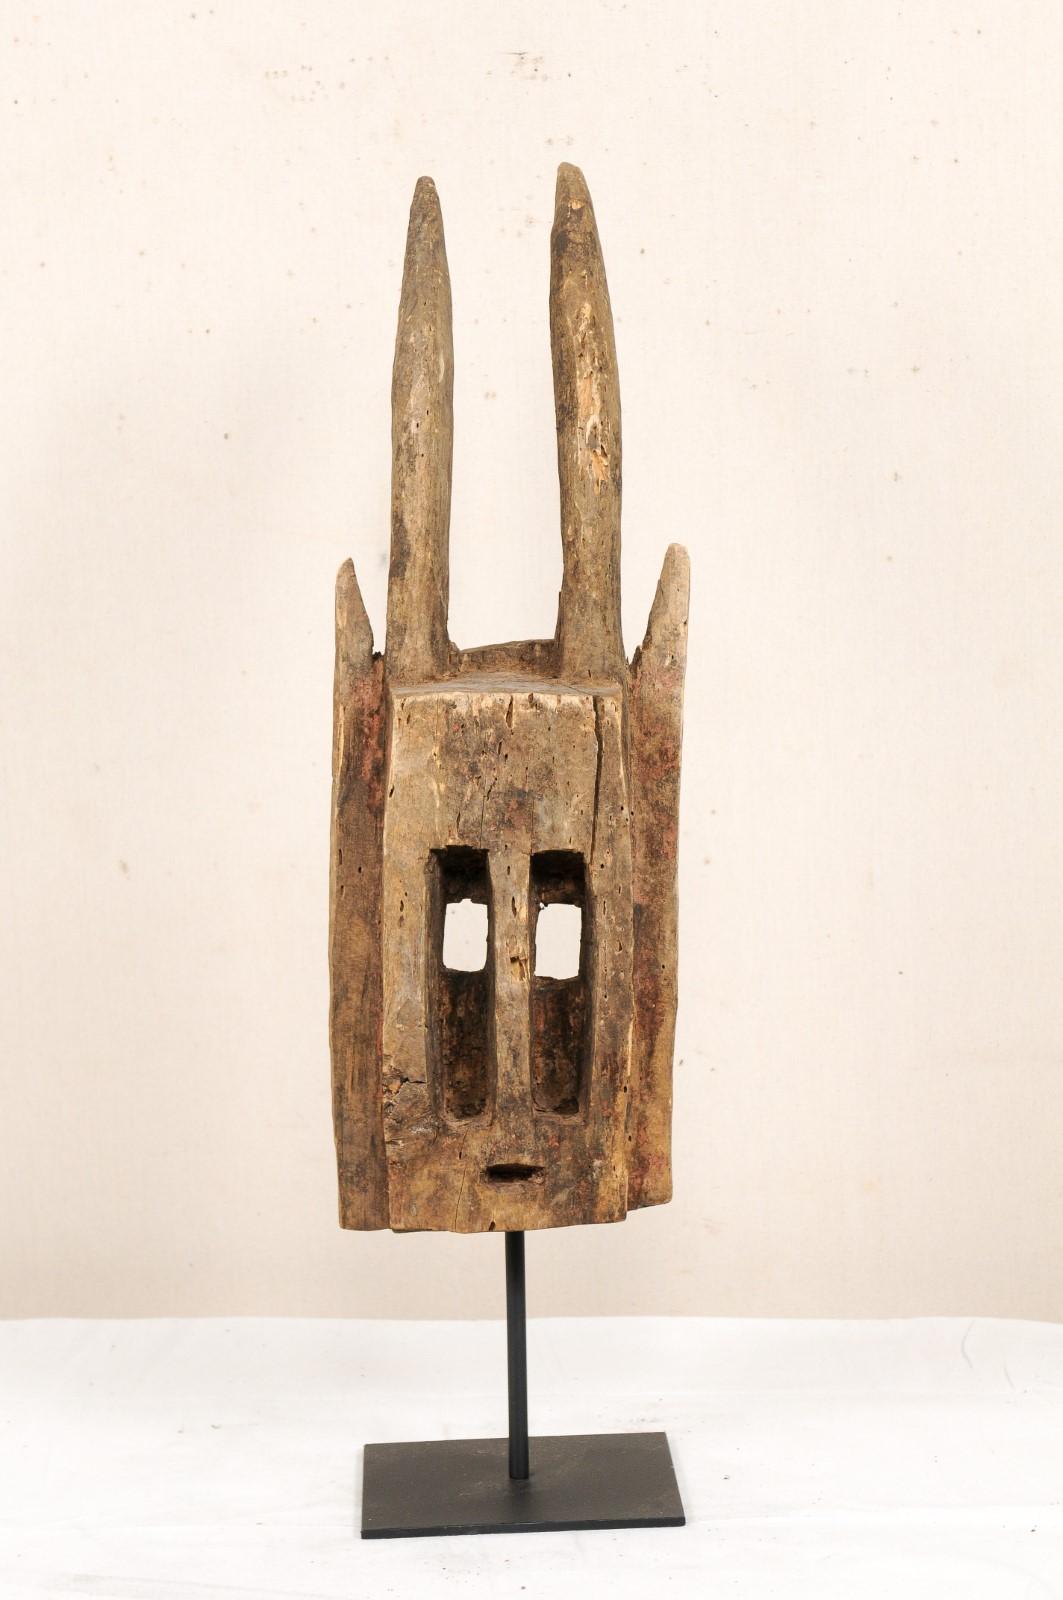 A Dogon Mali Dama ceremonial dance mask from the early to mid 20th century. This Dogon tribal wooden ceremonial dance mask originates from Mali, West Africa. The mask is carved to represent an antelope. The antelope or 